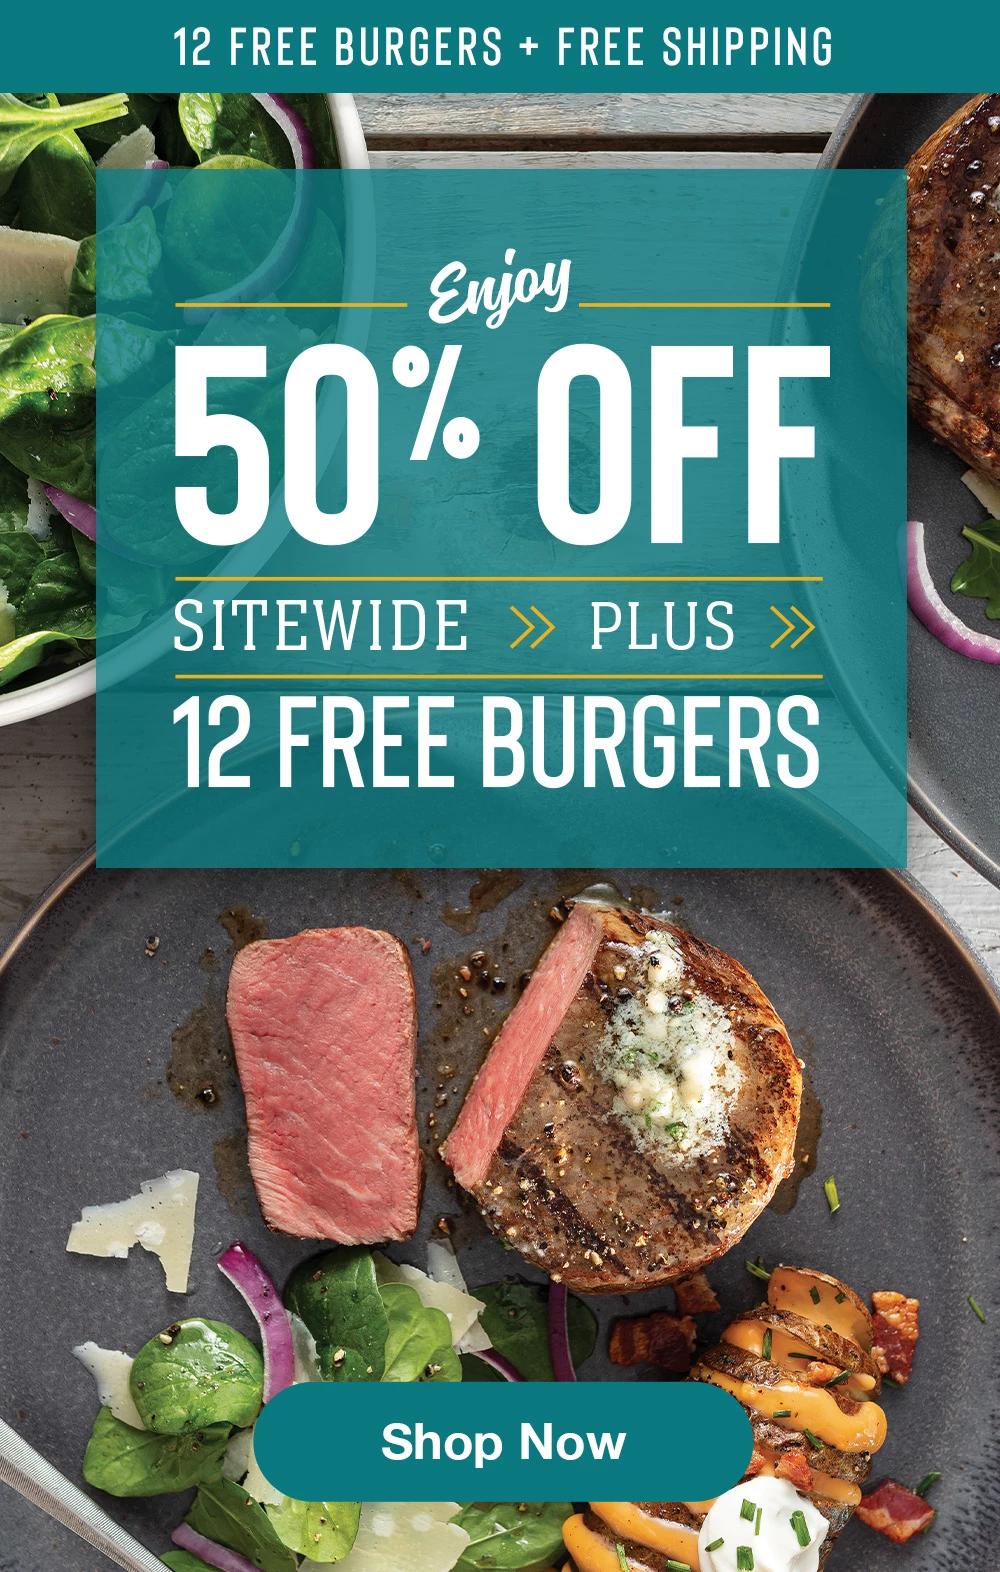 12 Free Burgers + Free Shipping | Enjoy 50% off Sitewide >> plus >> 12 FREE BURGER || SHOP NOW